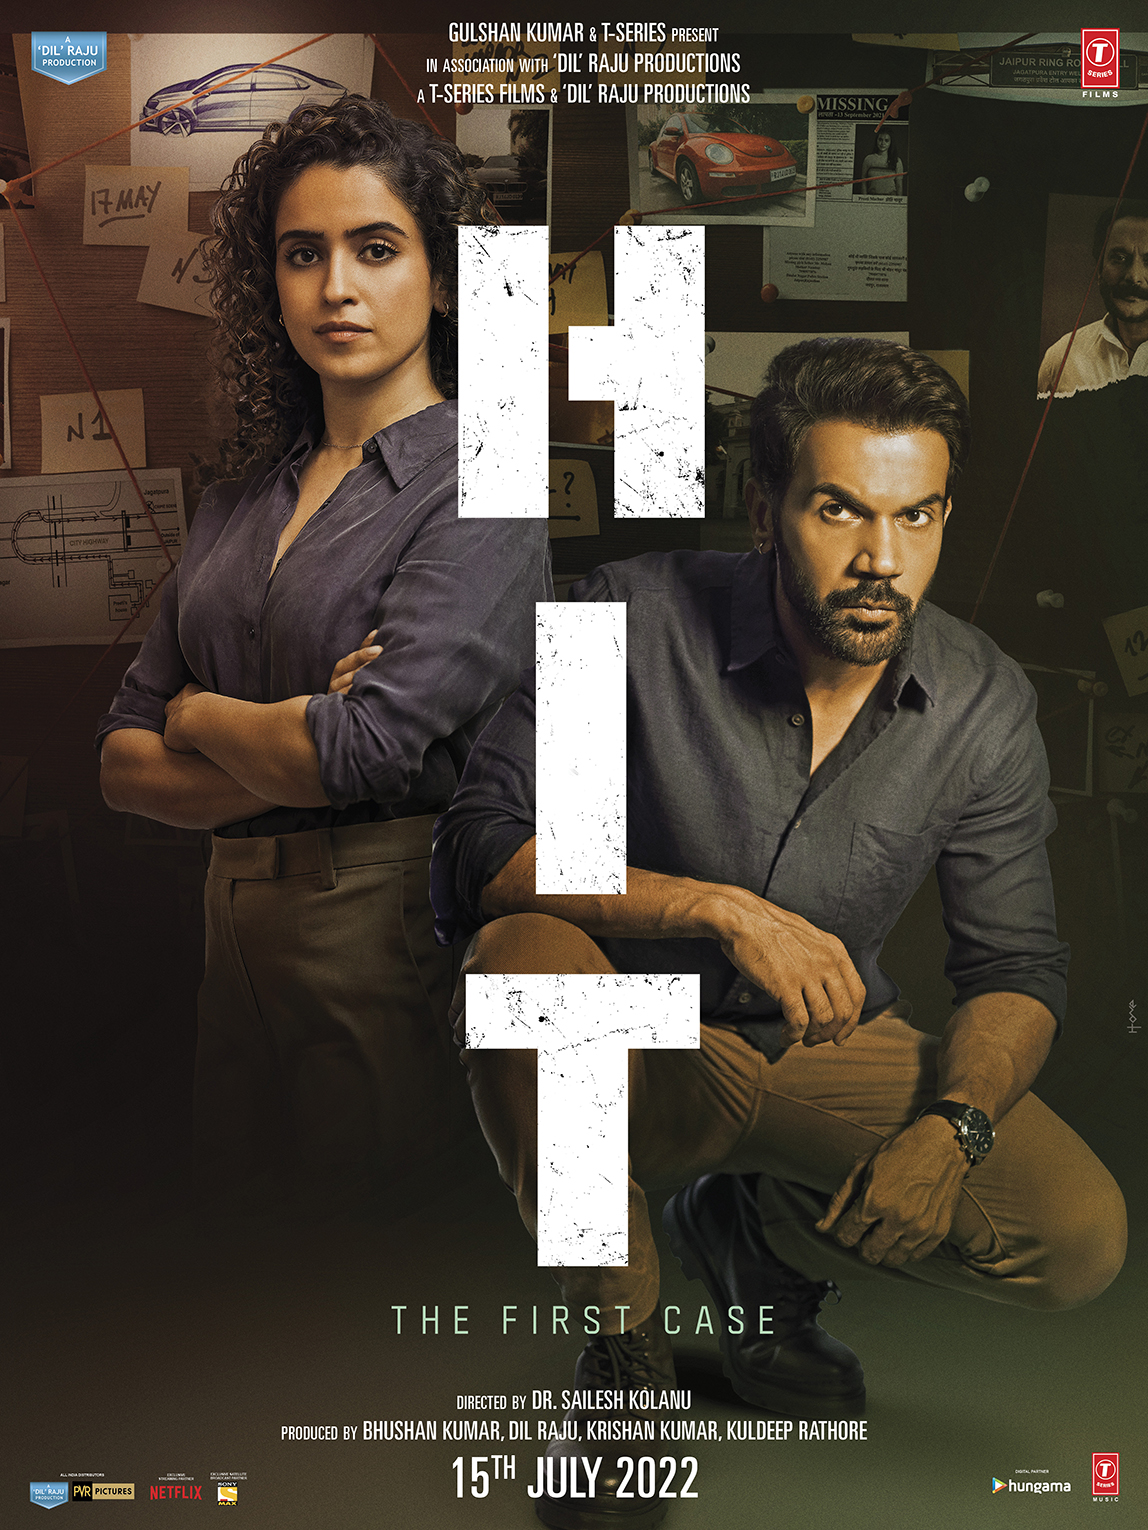 HIT: The First Case (2022) New Bollywood Hindi Full Movie S-Print 480p, 720p & 1080p